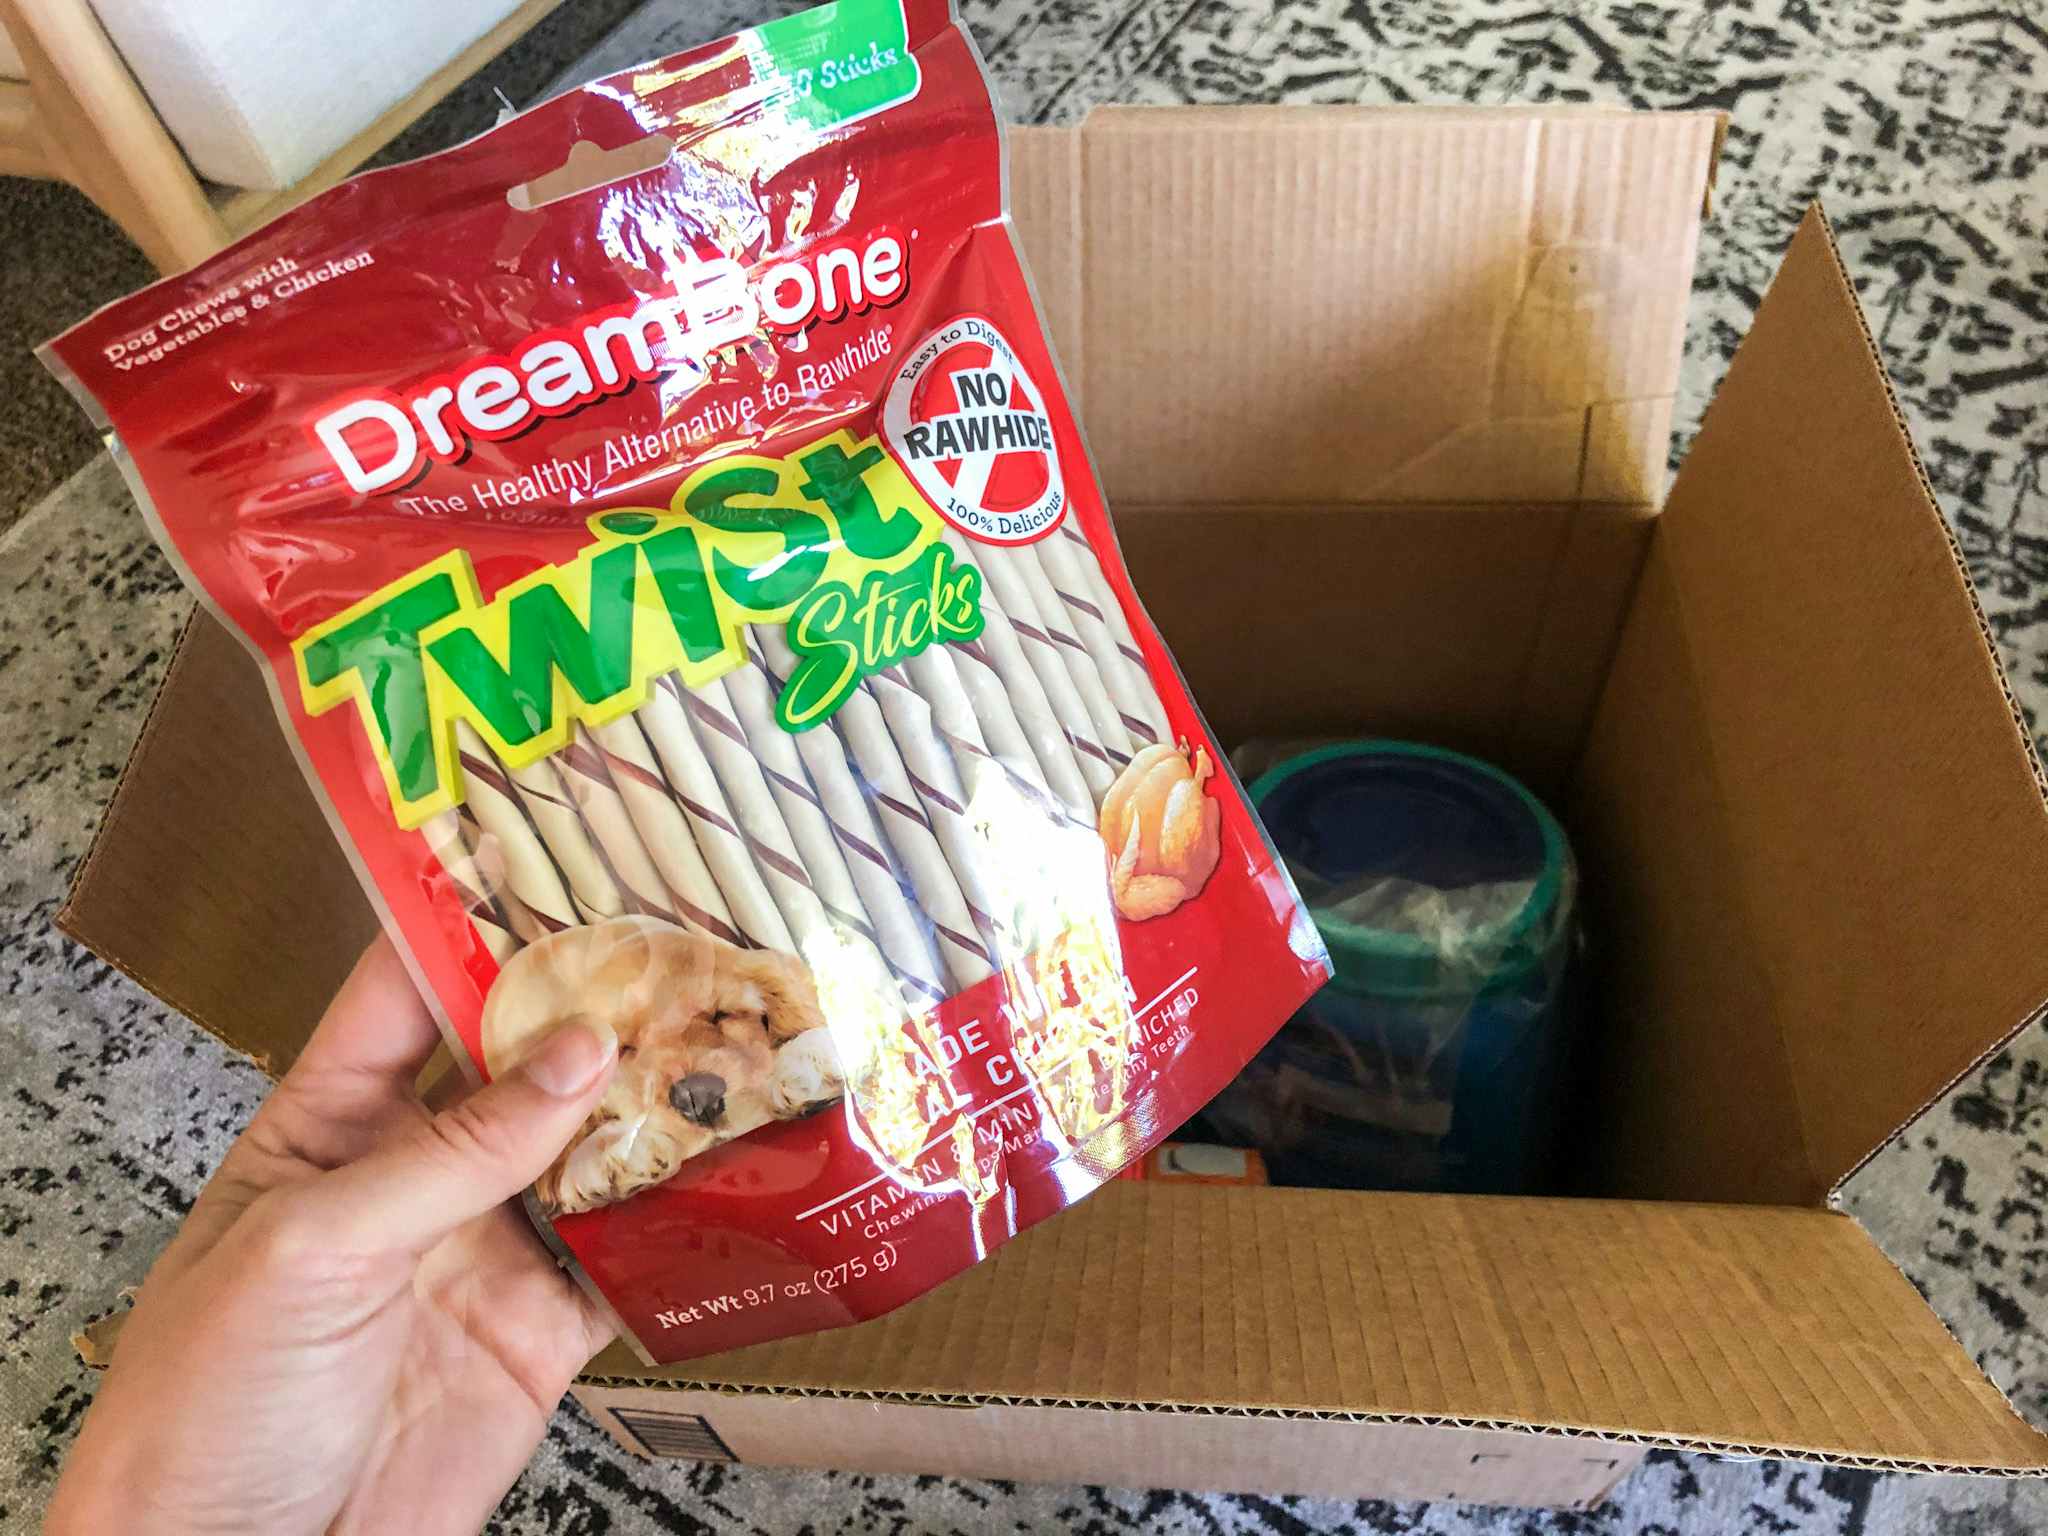 A hand holding Dreambone Twist Sticks near an open delivery box.